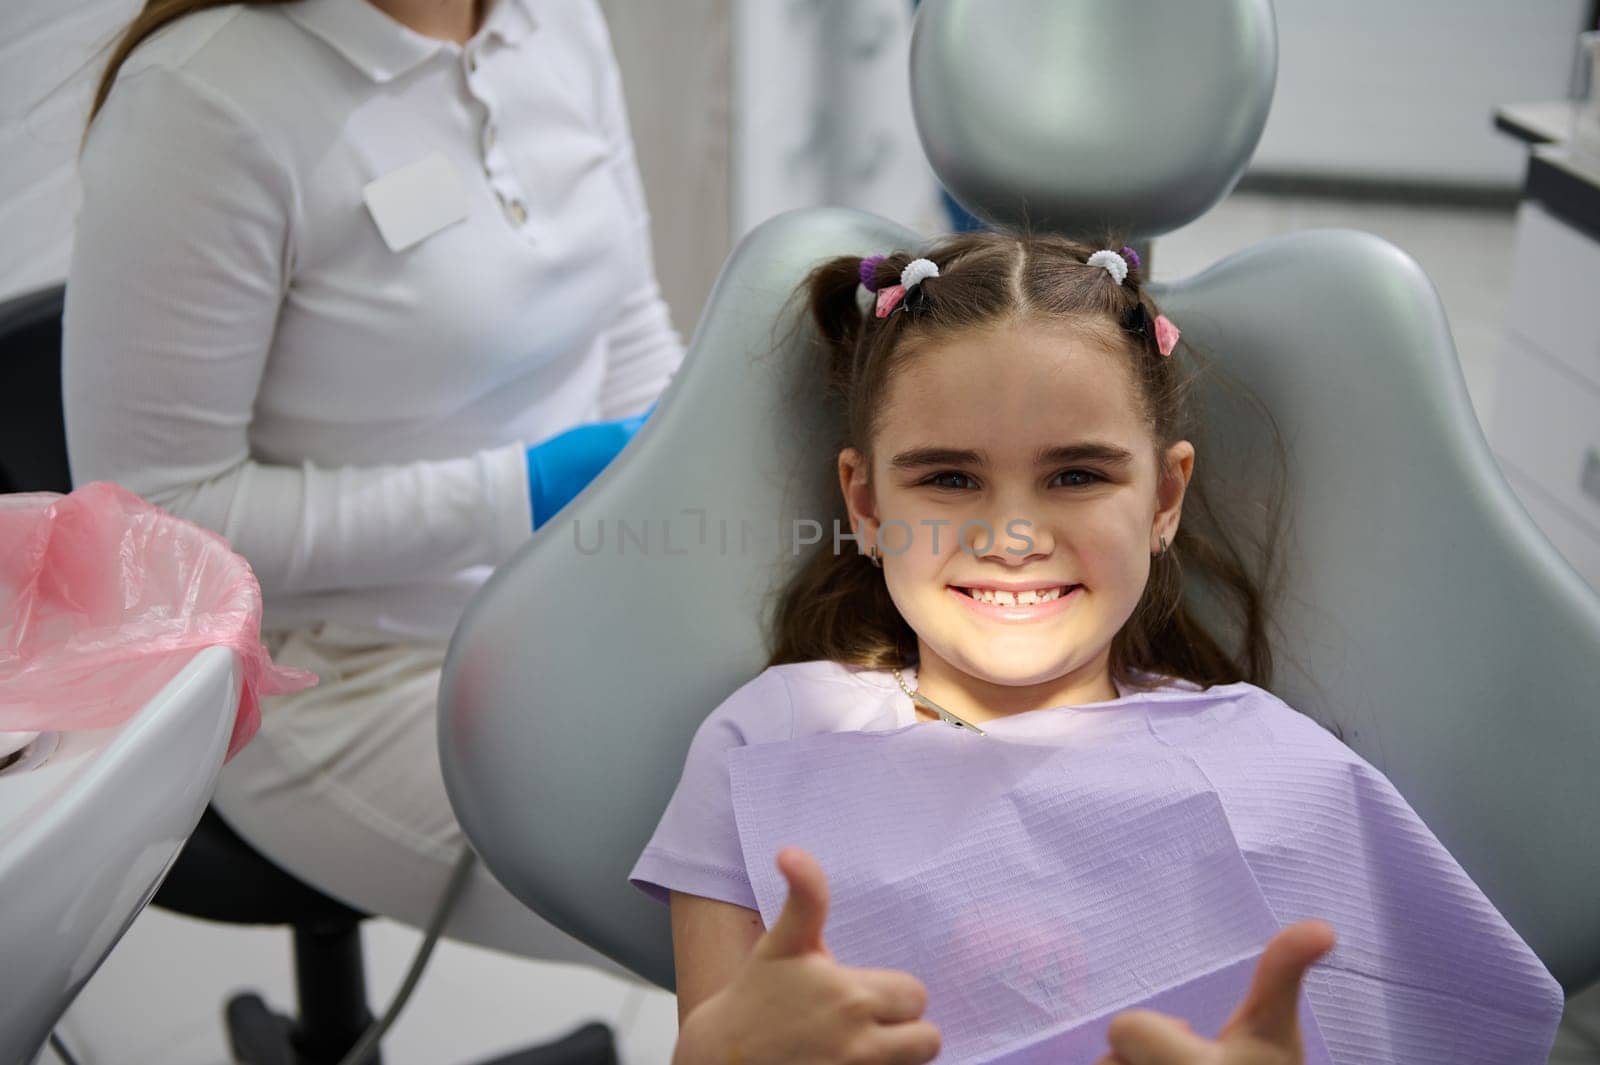 Smiling little girl at dentist appointment, sitting on dental chair, showing thumbs up after preventive dental check up in modern children's dental clinic. Pediatric dentistry. Prevention of caries